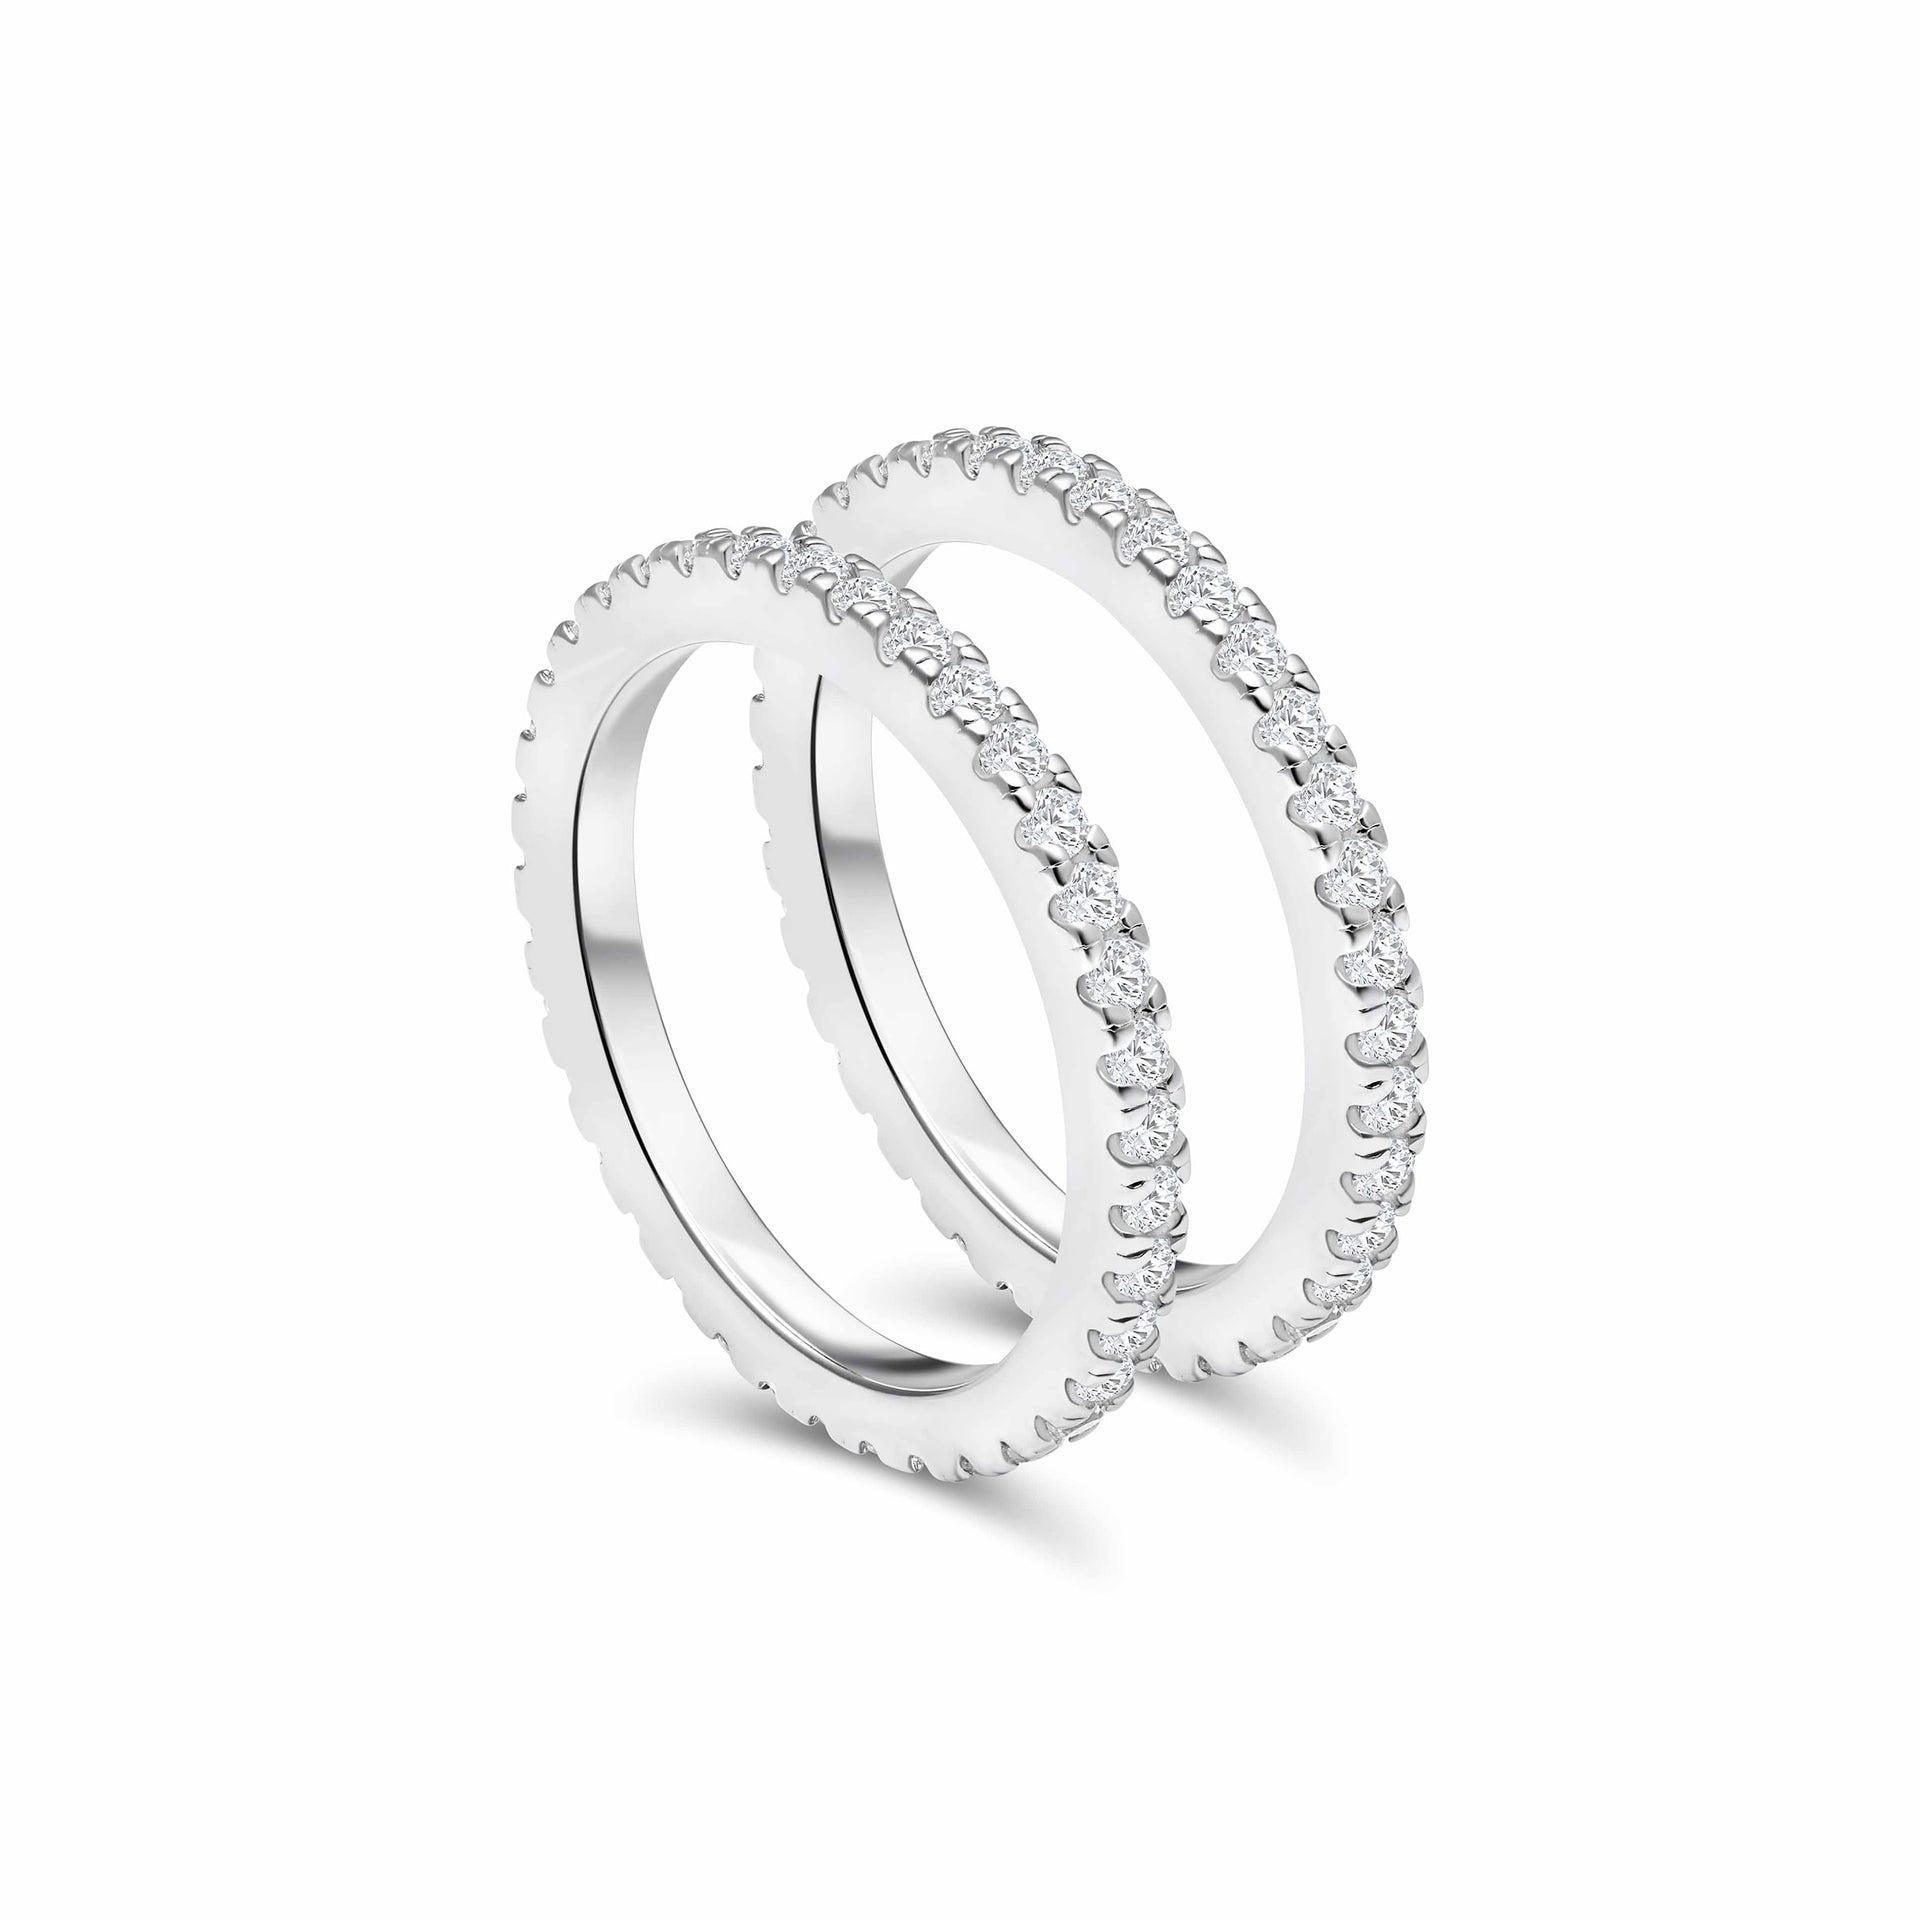 gorgeous promise wedding bands standing shown in silver